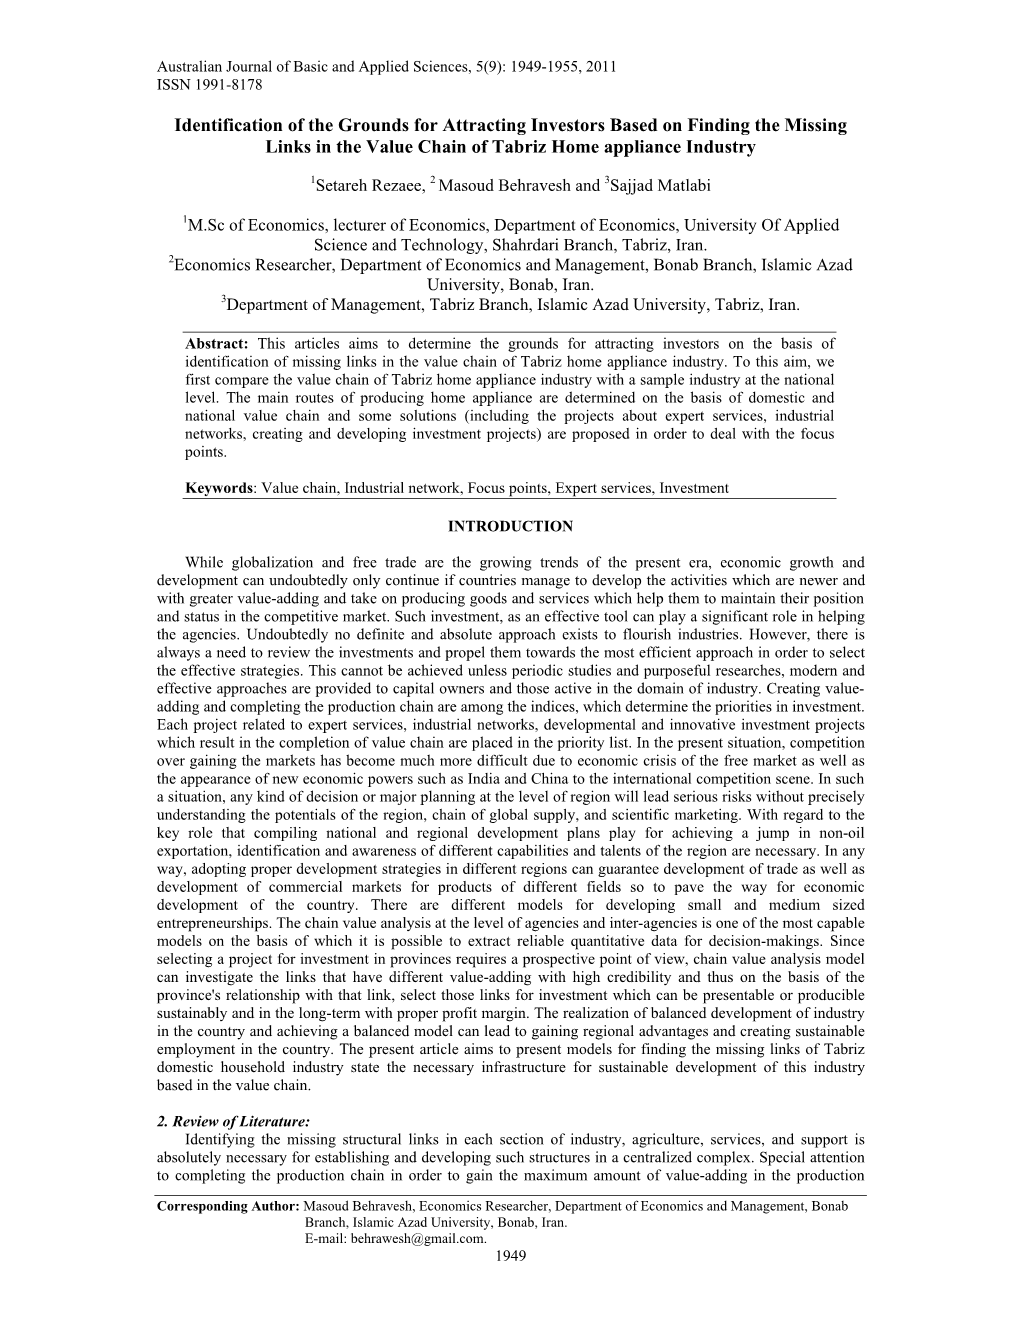 Identification of the Grounds for Attracting Investors Based on Finding the Missing Links in the Value Chain of Tabriz Home Appliance Industry